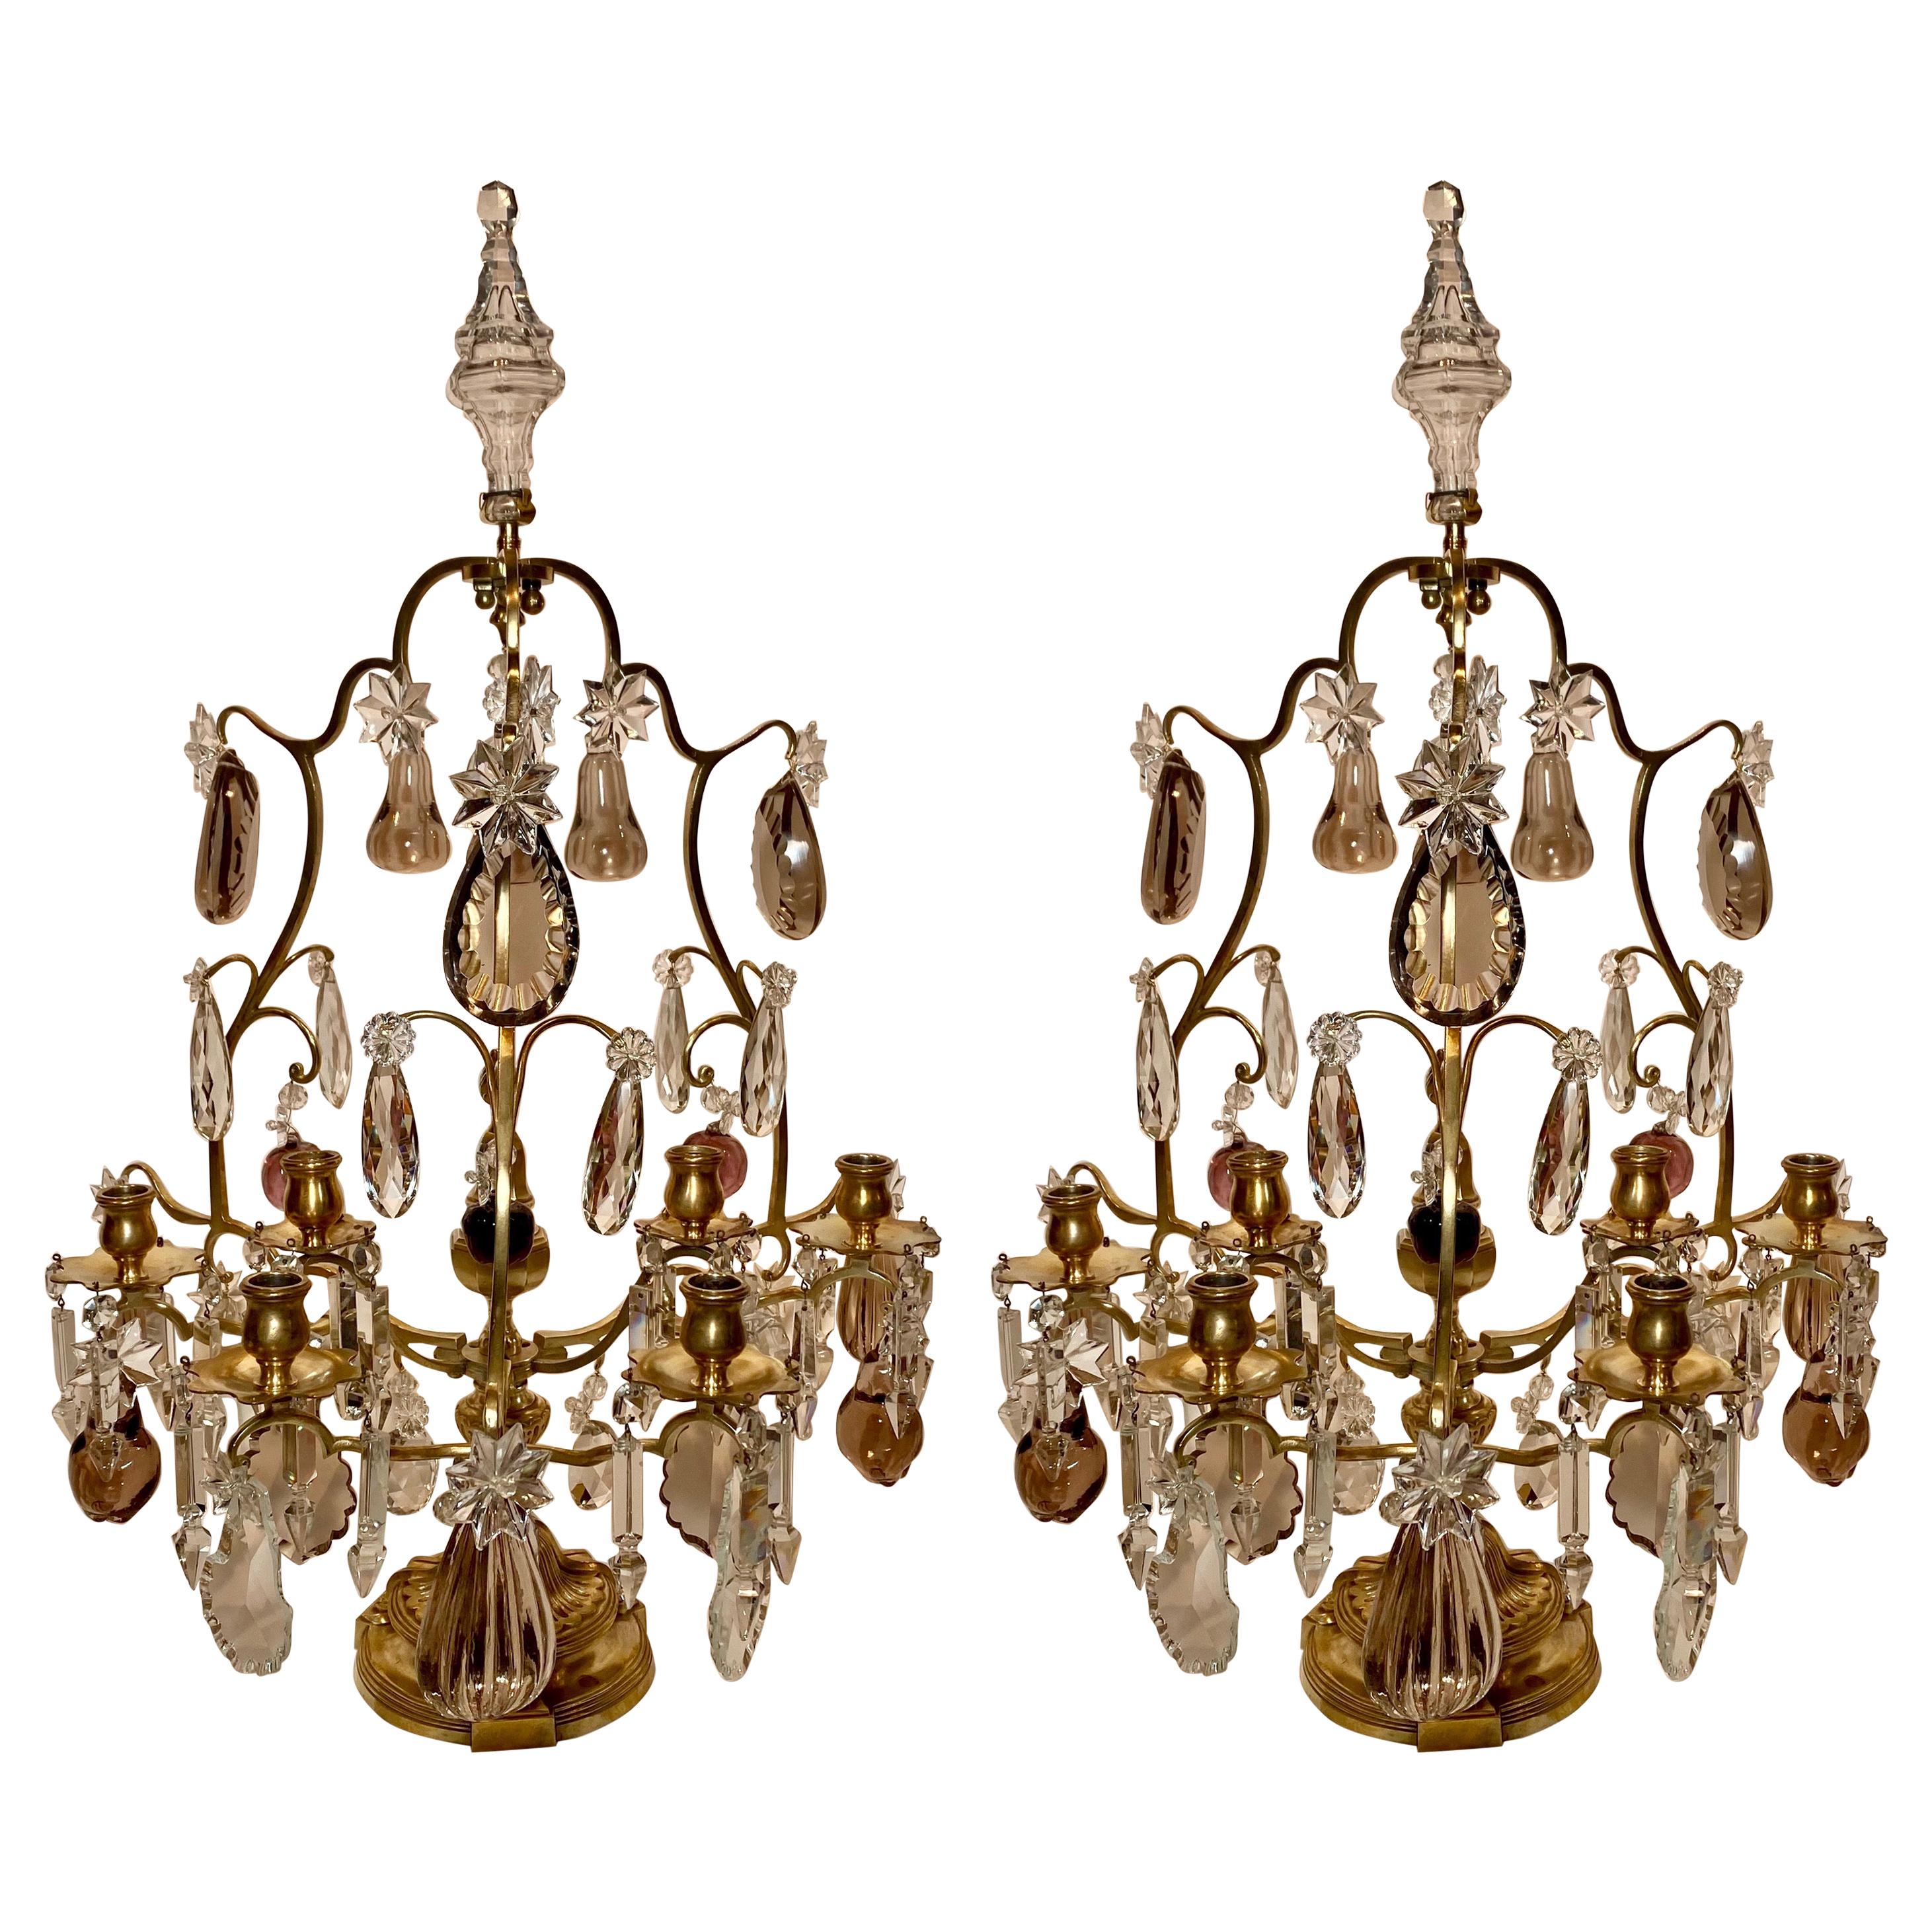 Pair of Antique French Baccarat and Bronze Lyre Girondolles, circa 1875-1885 For Sale